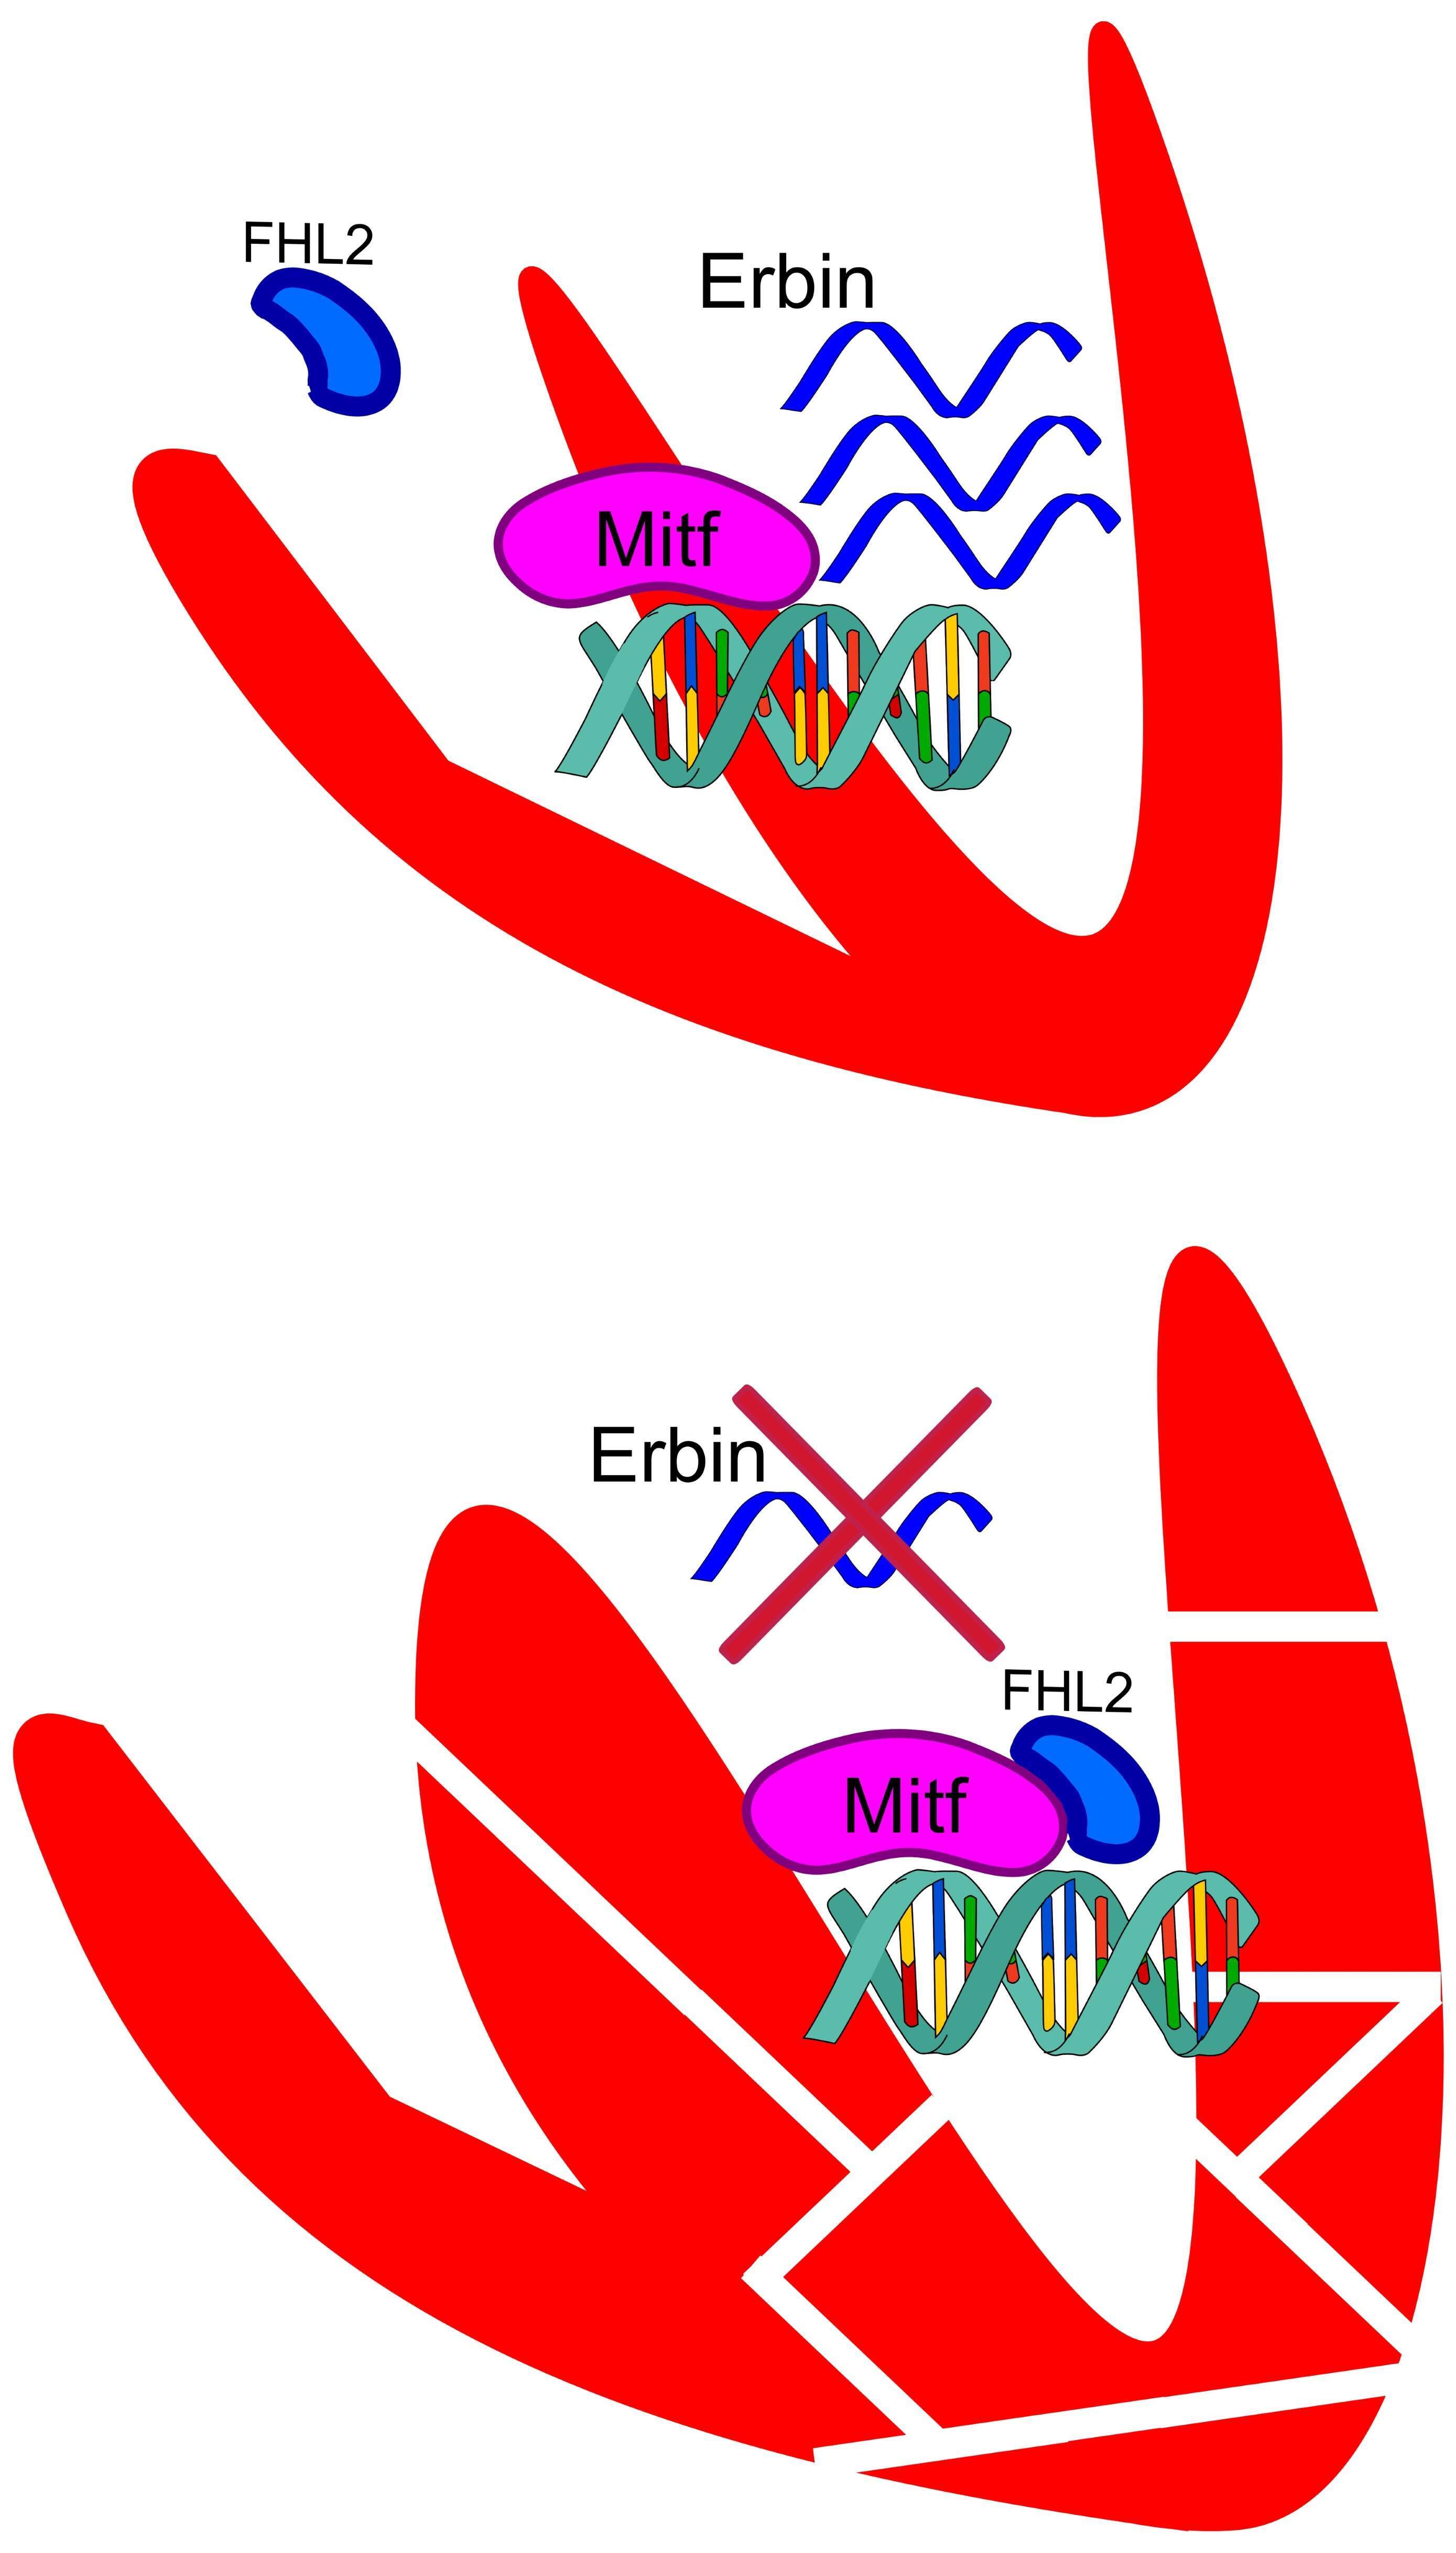 Model of the regulation of Erbin expression by MITF and FHL2 in cardiac hypertrophy